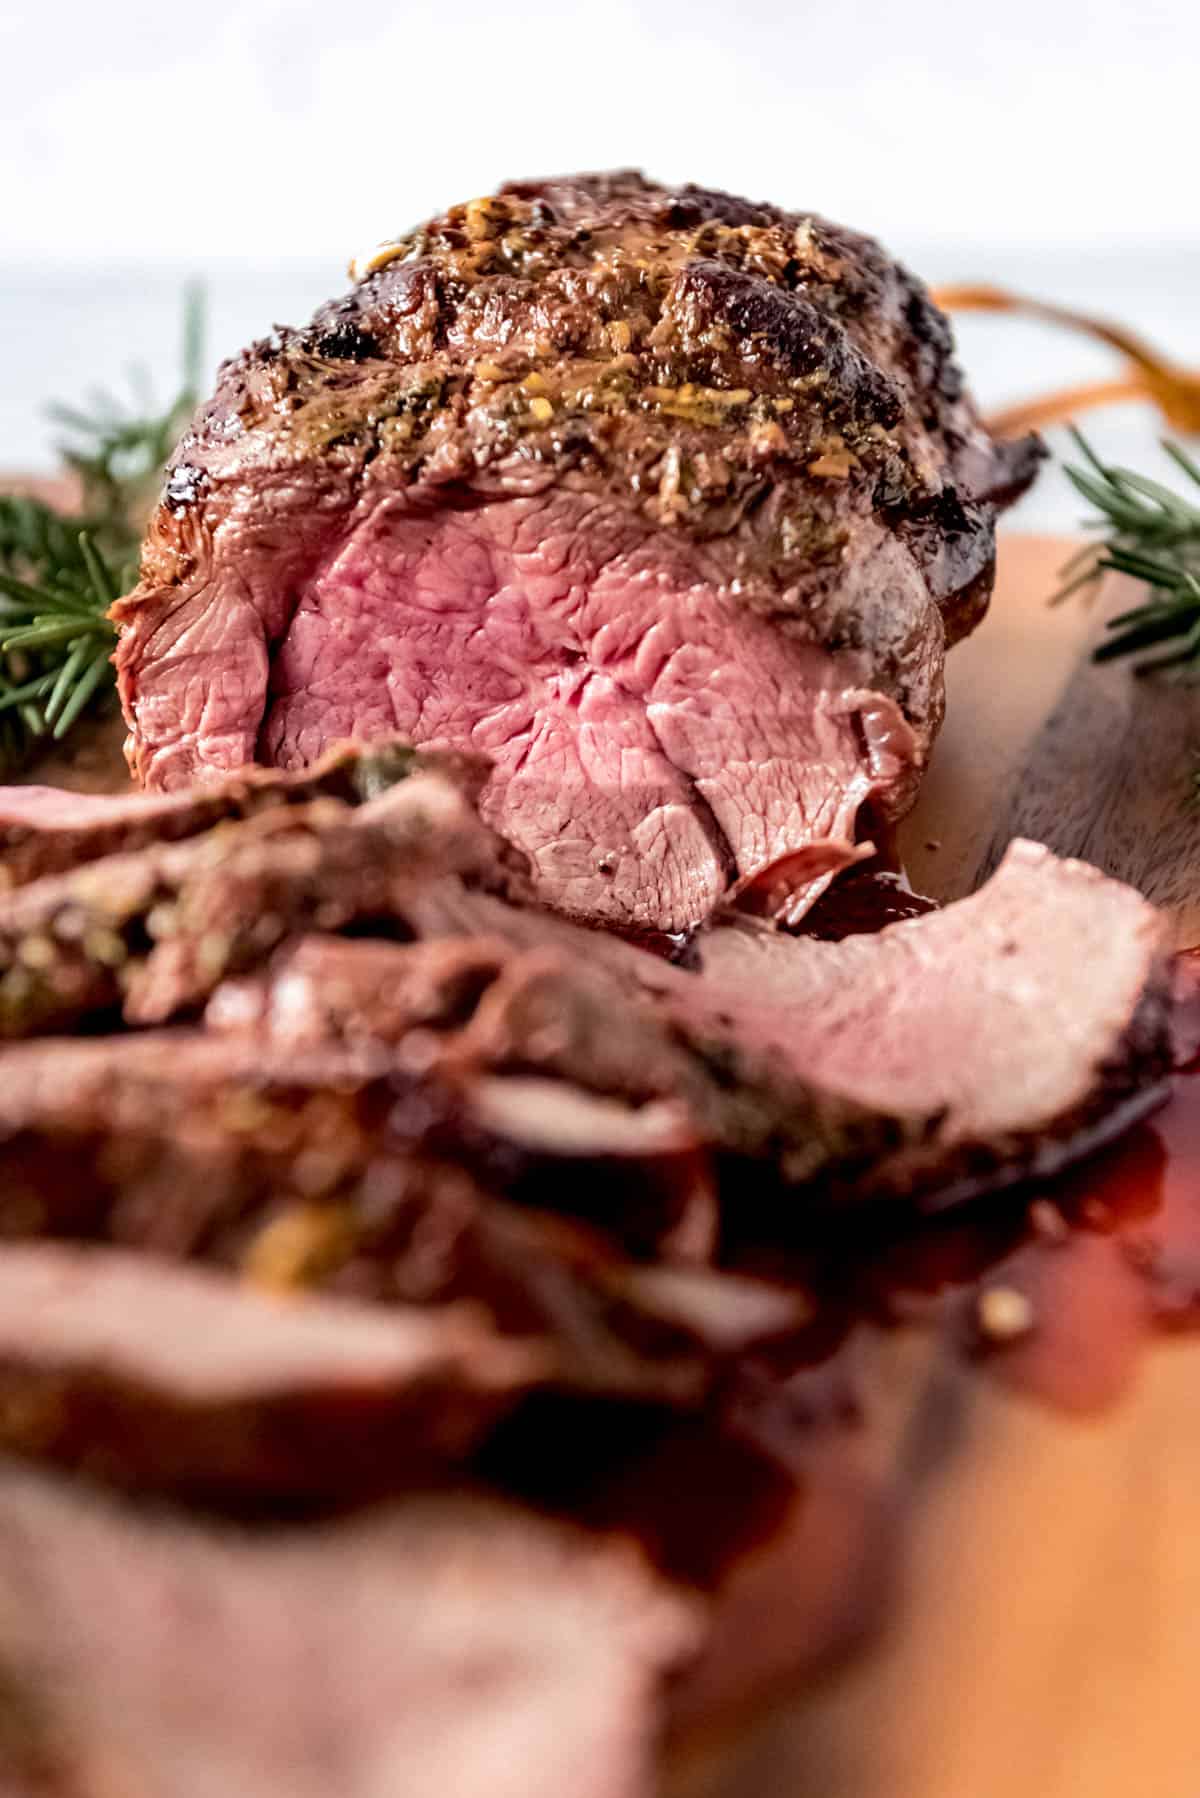 Close up of the rosy pink center of a medium cooked beef tenderloin roast.